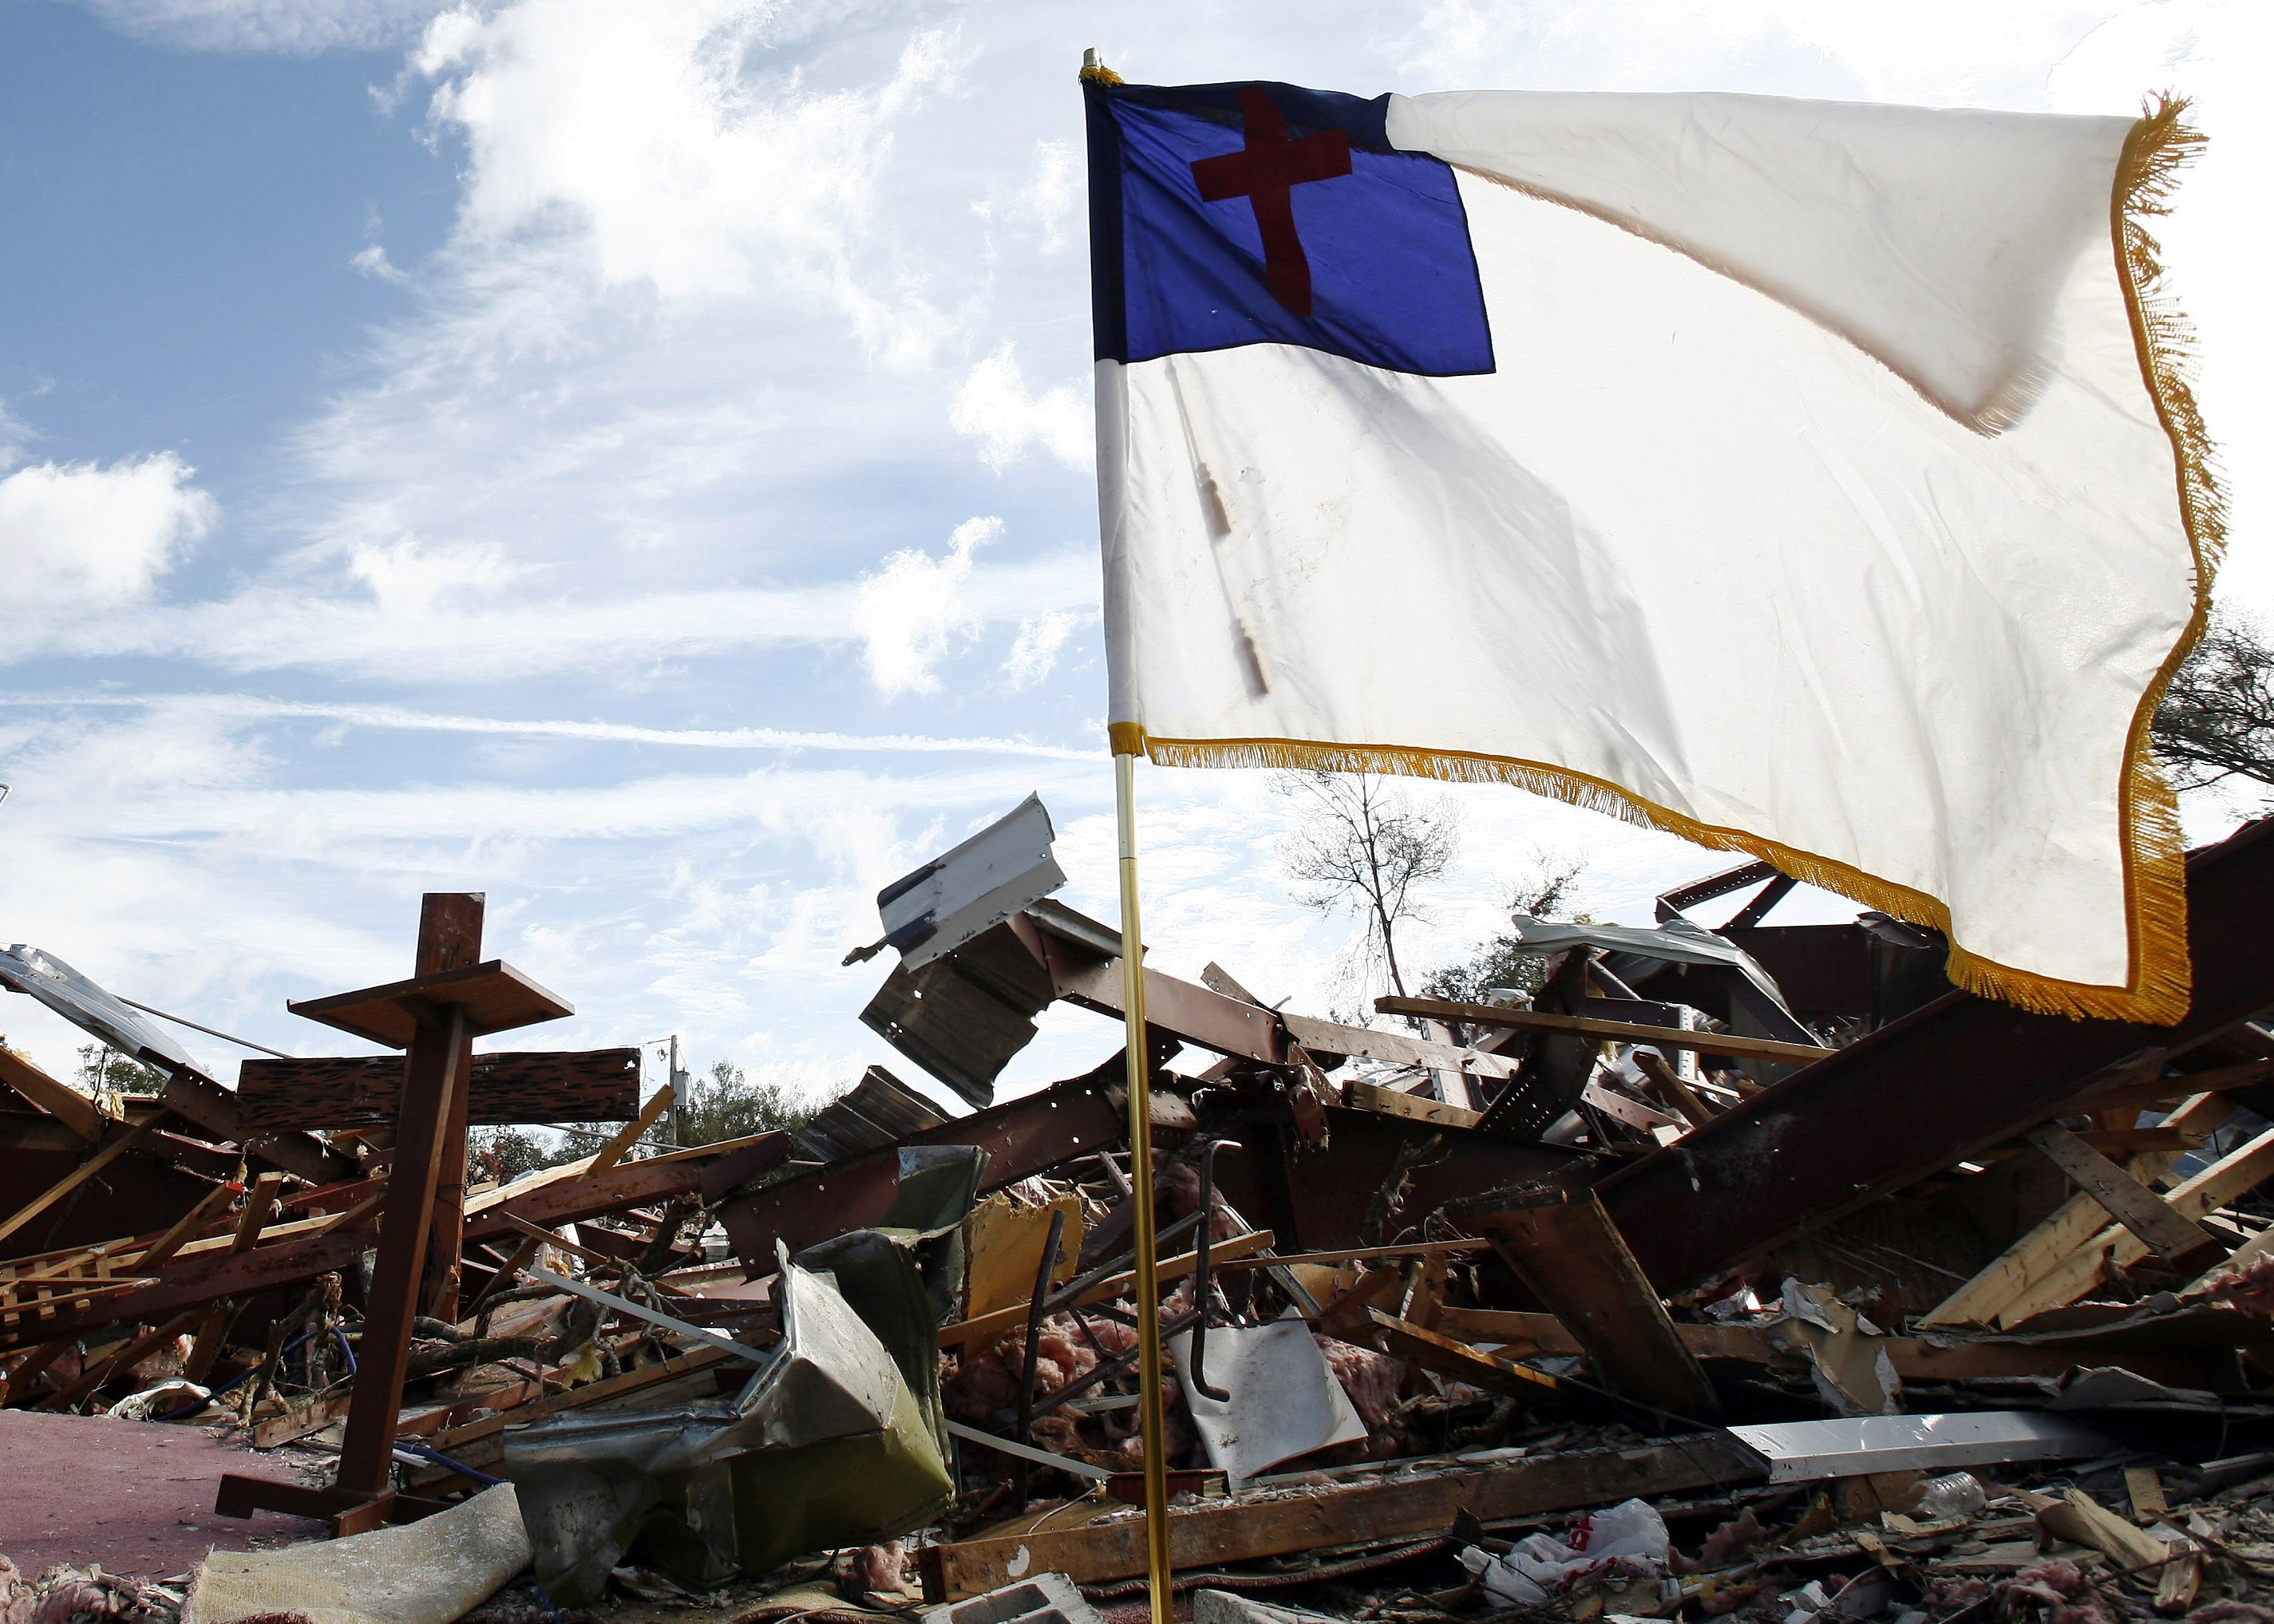 A Christian flag is seen in 2007 amid tornado rubble in Lady Lake, Fla., in this illustration photo. The flag pictured is like the one the group Camp Constitution wanted to have fly outside Boston's City Hall and city officials denied it in 2017. (CNS pho